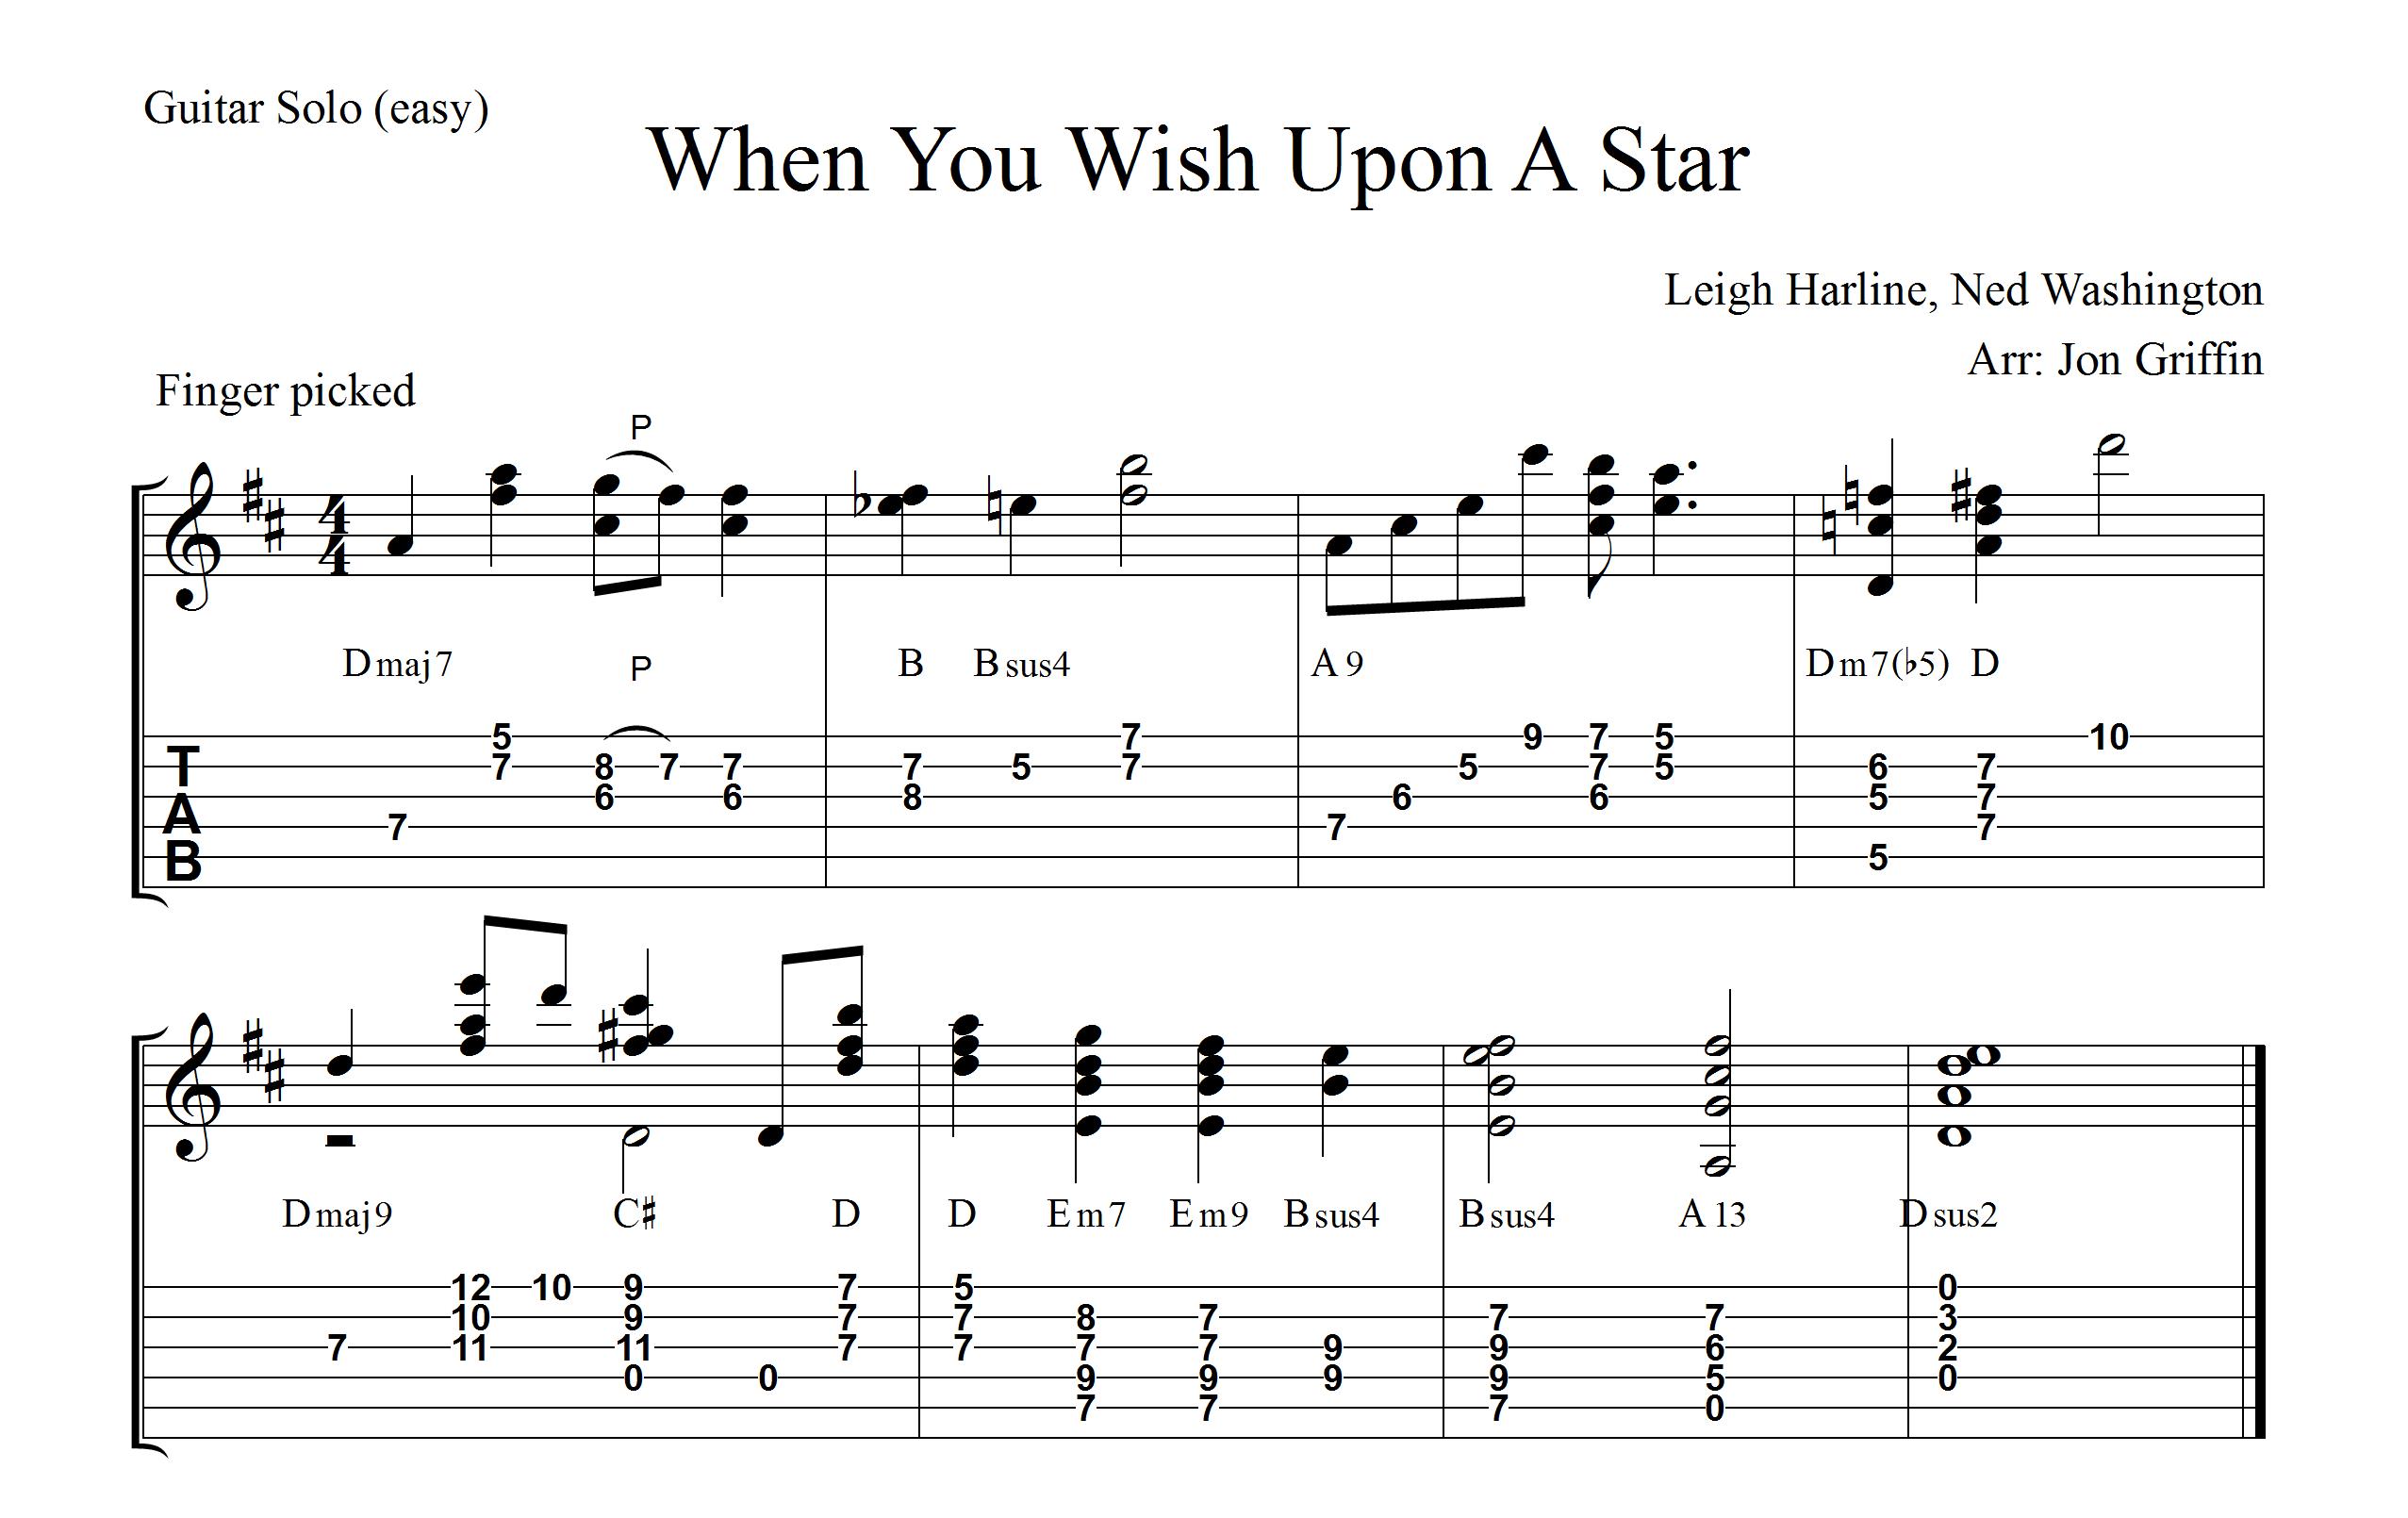 When You Wish Upon a Star (chord melody)